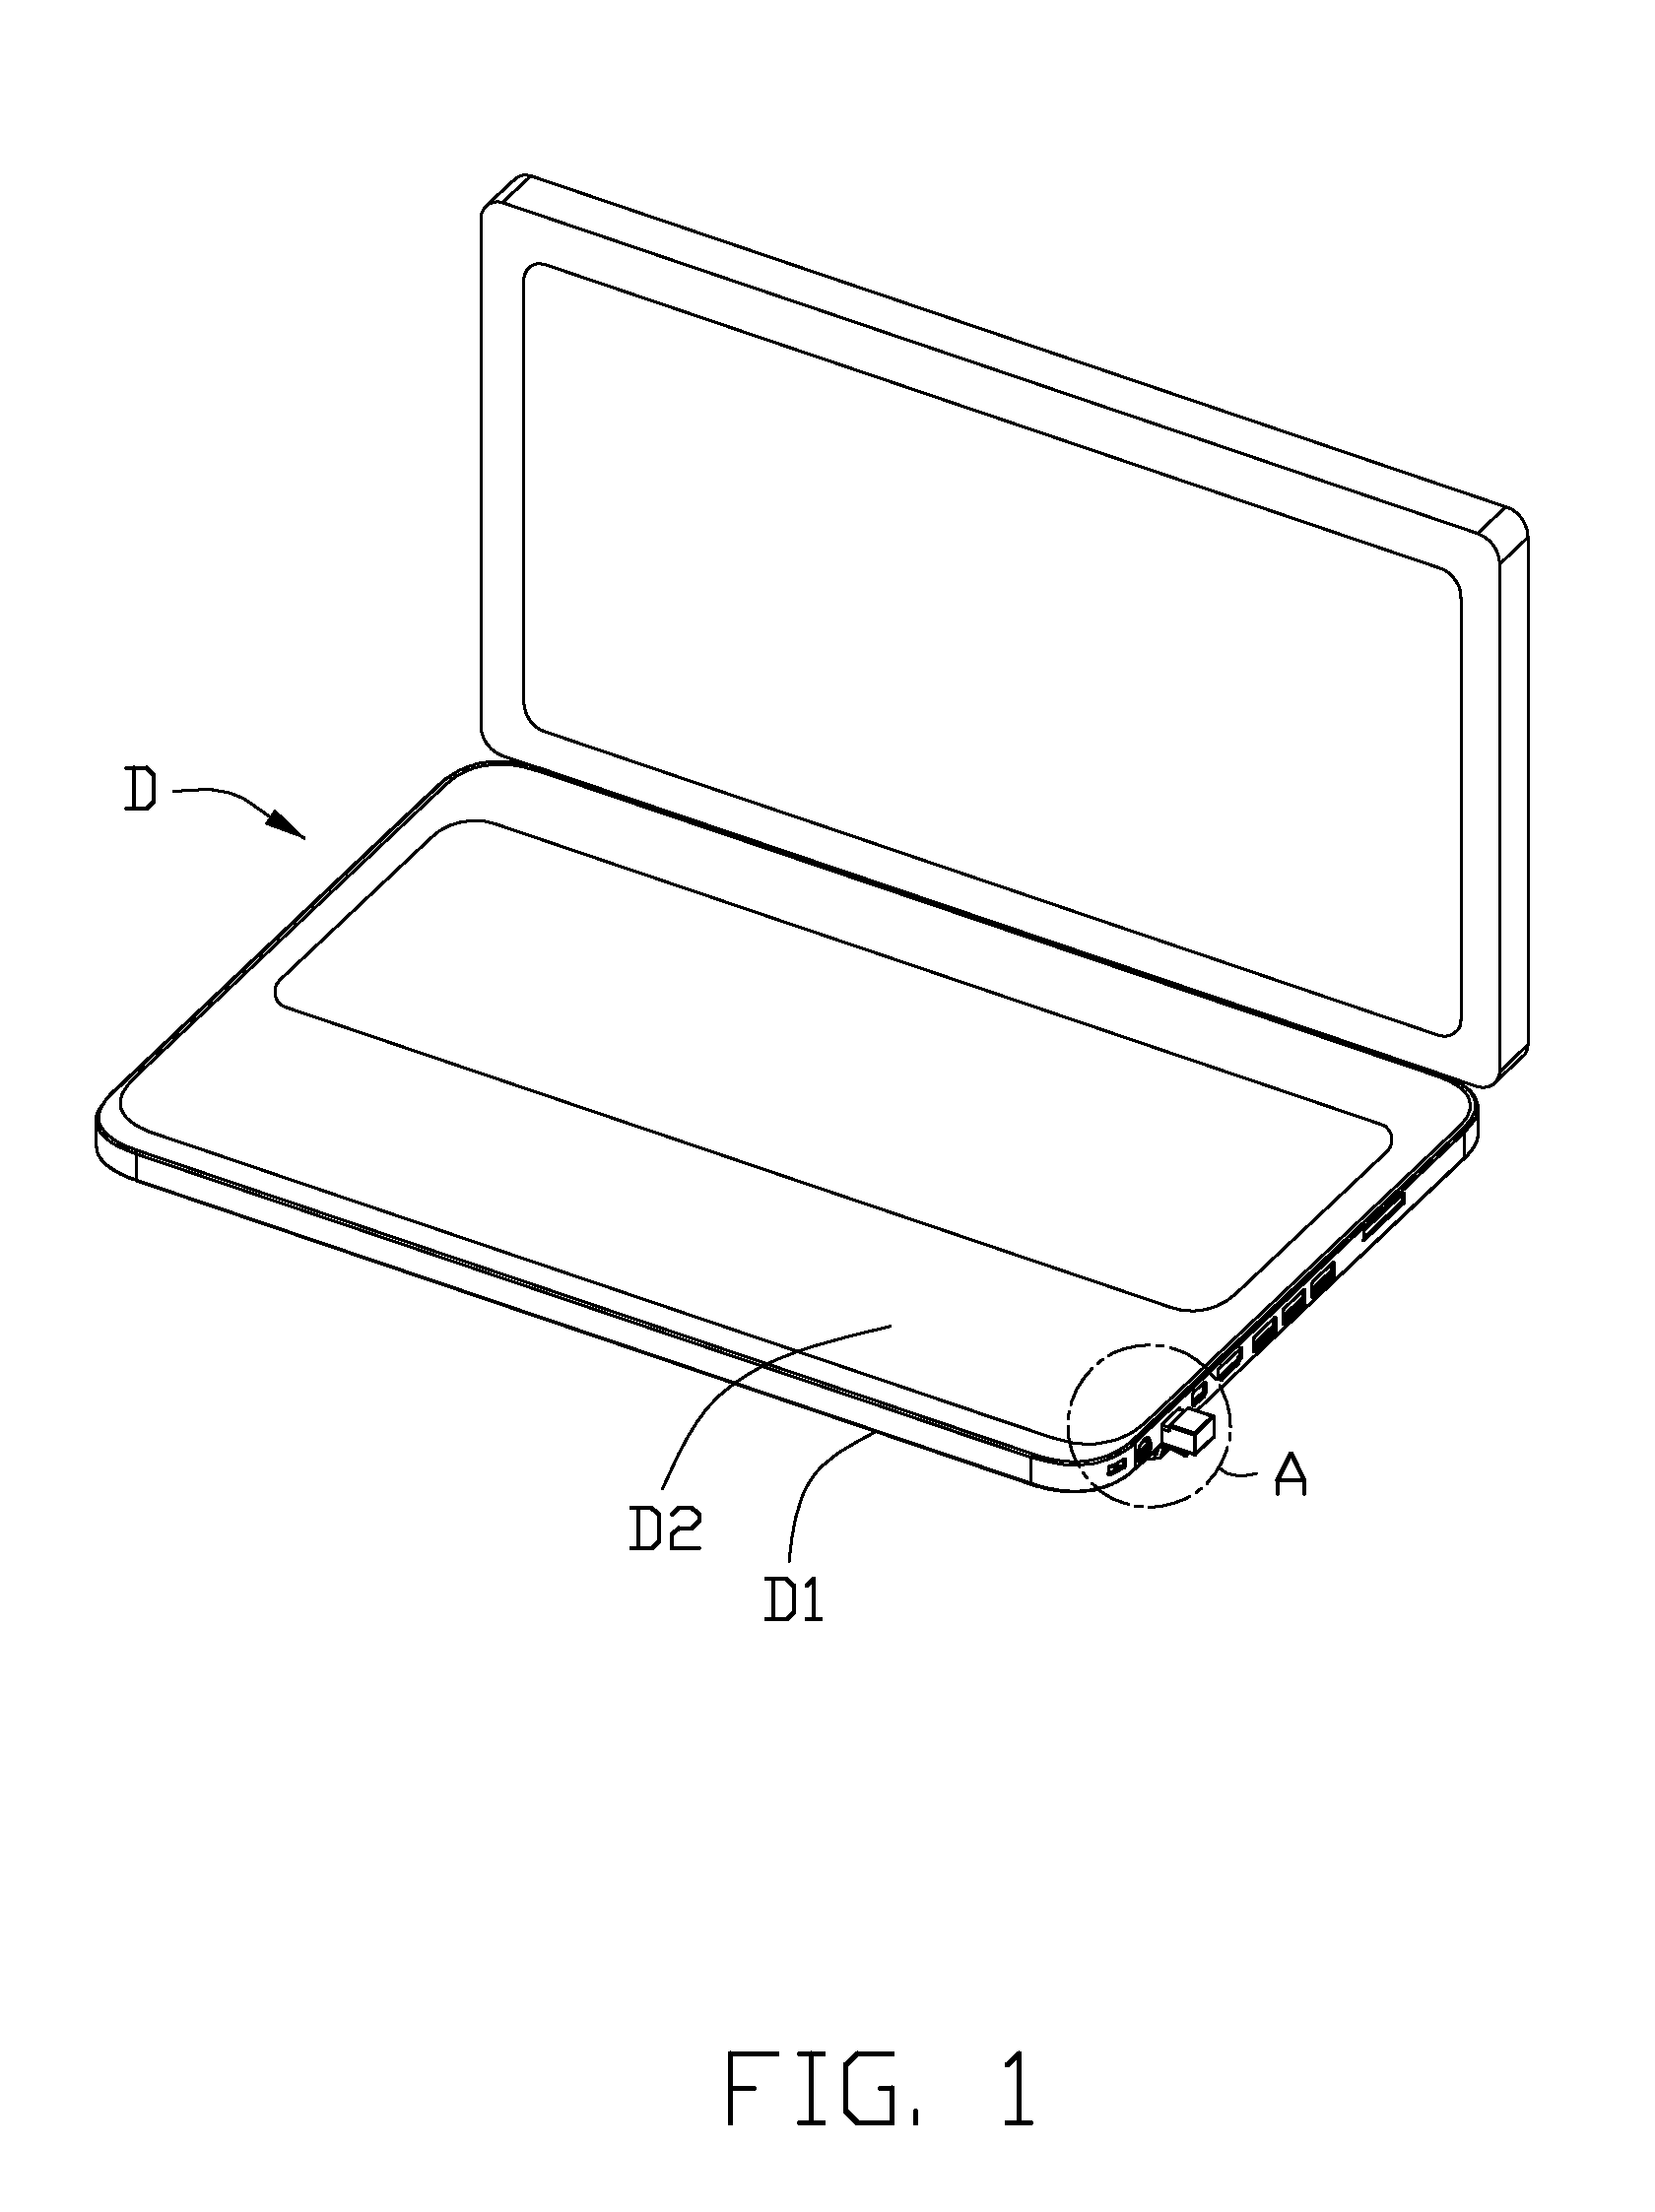 Electrical device with a clamshell electrical connector